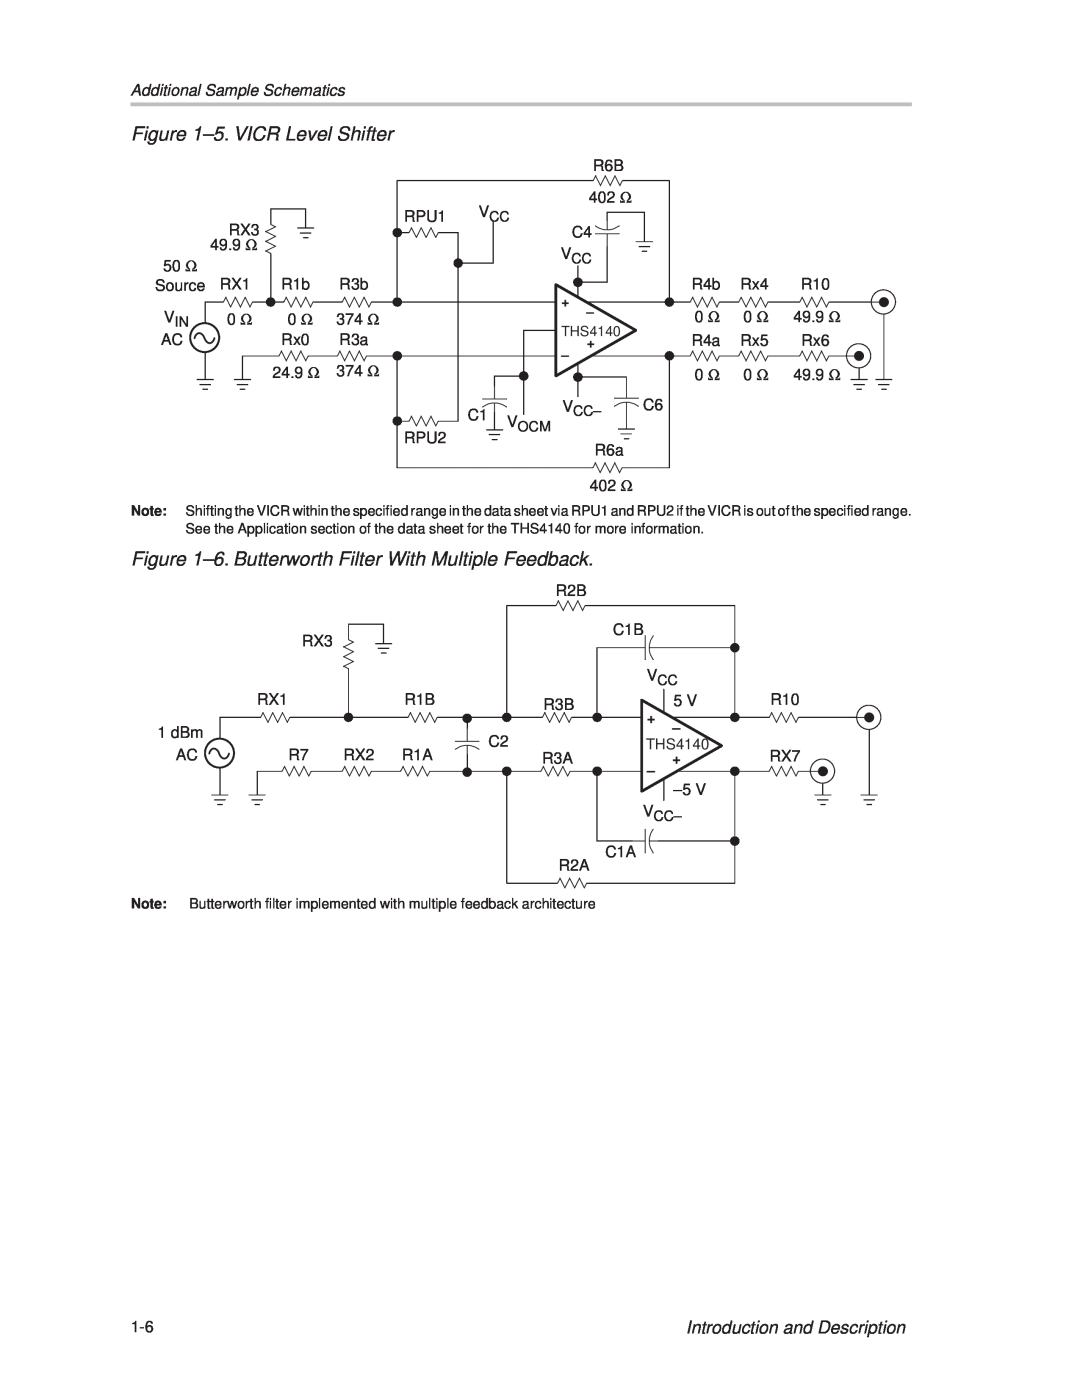 Texas Instruments SLOU106 manual ±5. VICR Level Shifter, Introduction and Description, Additional Sample Schematics 